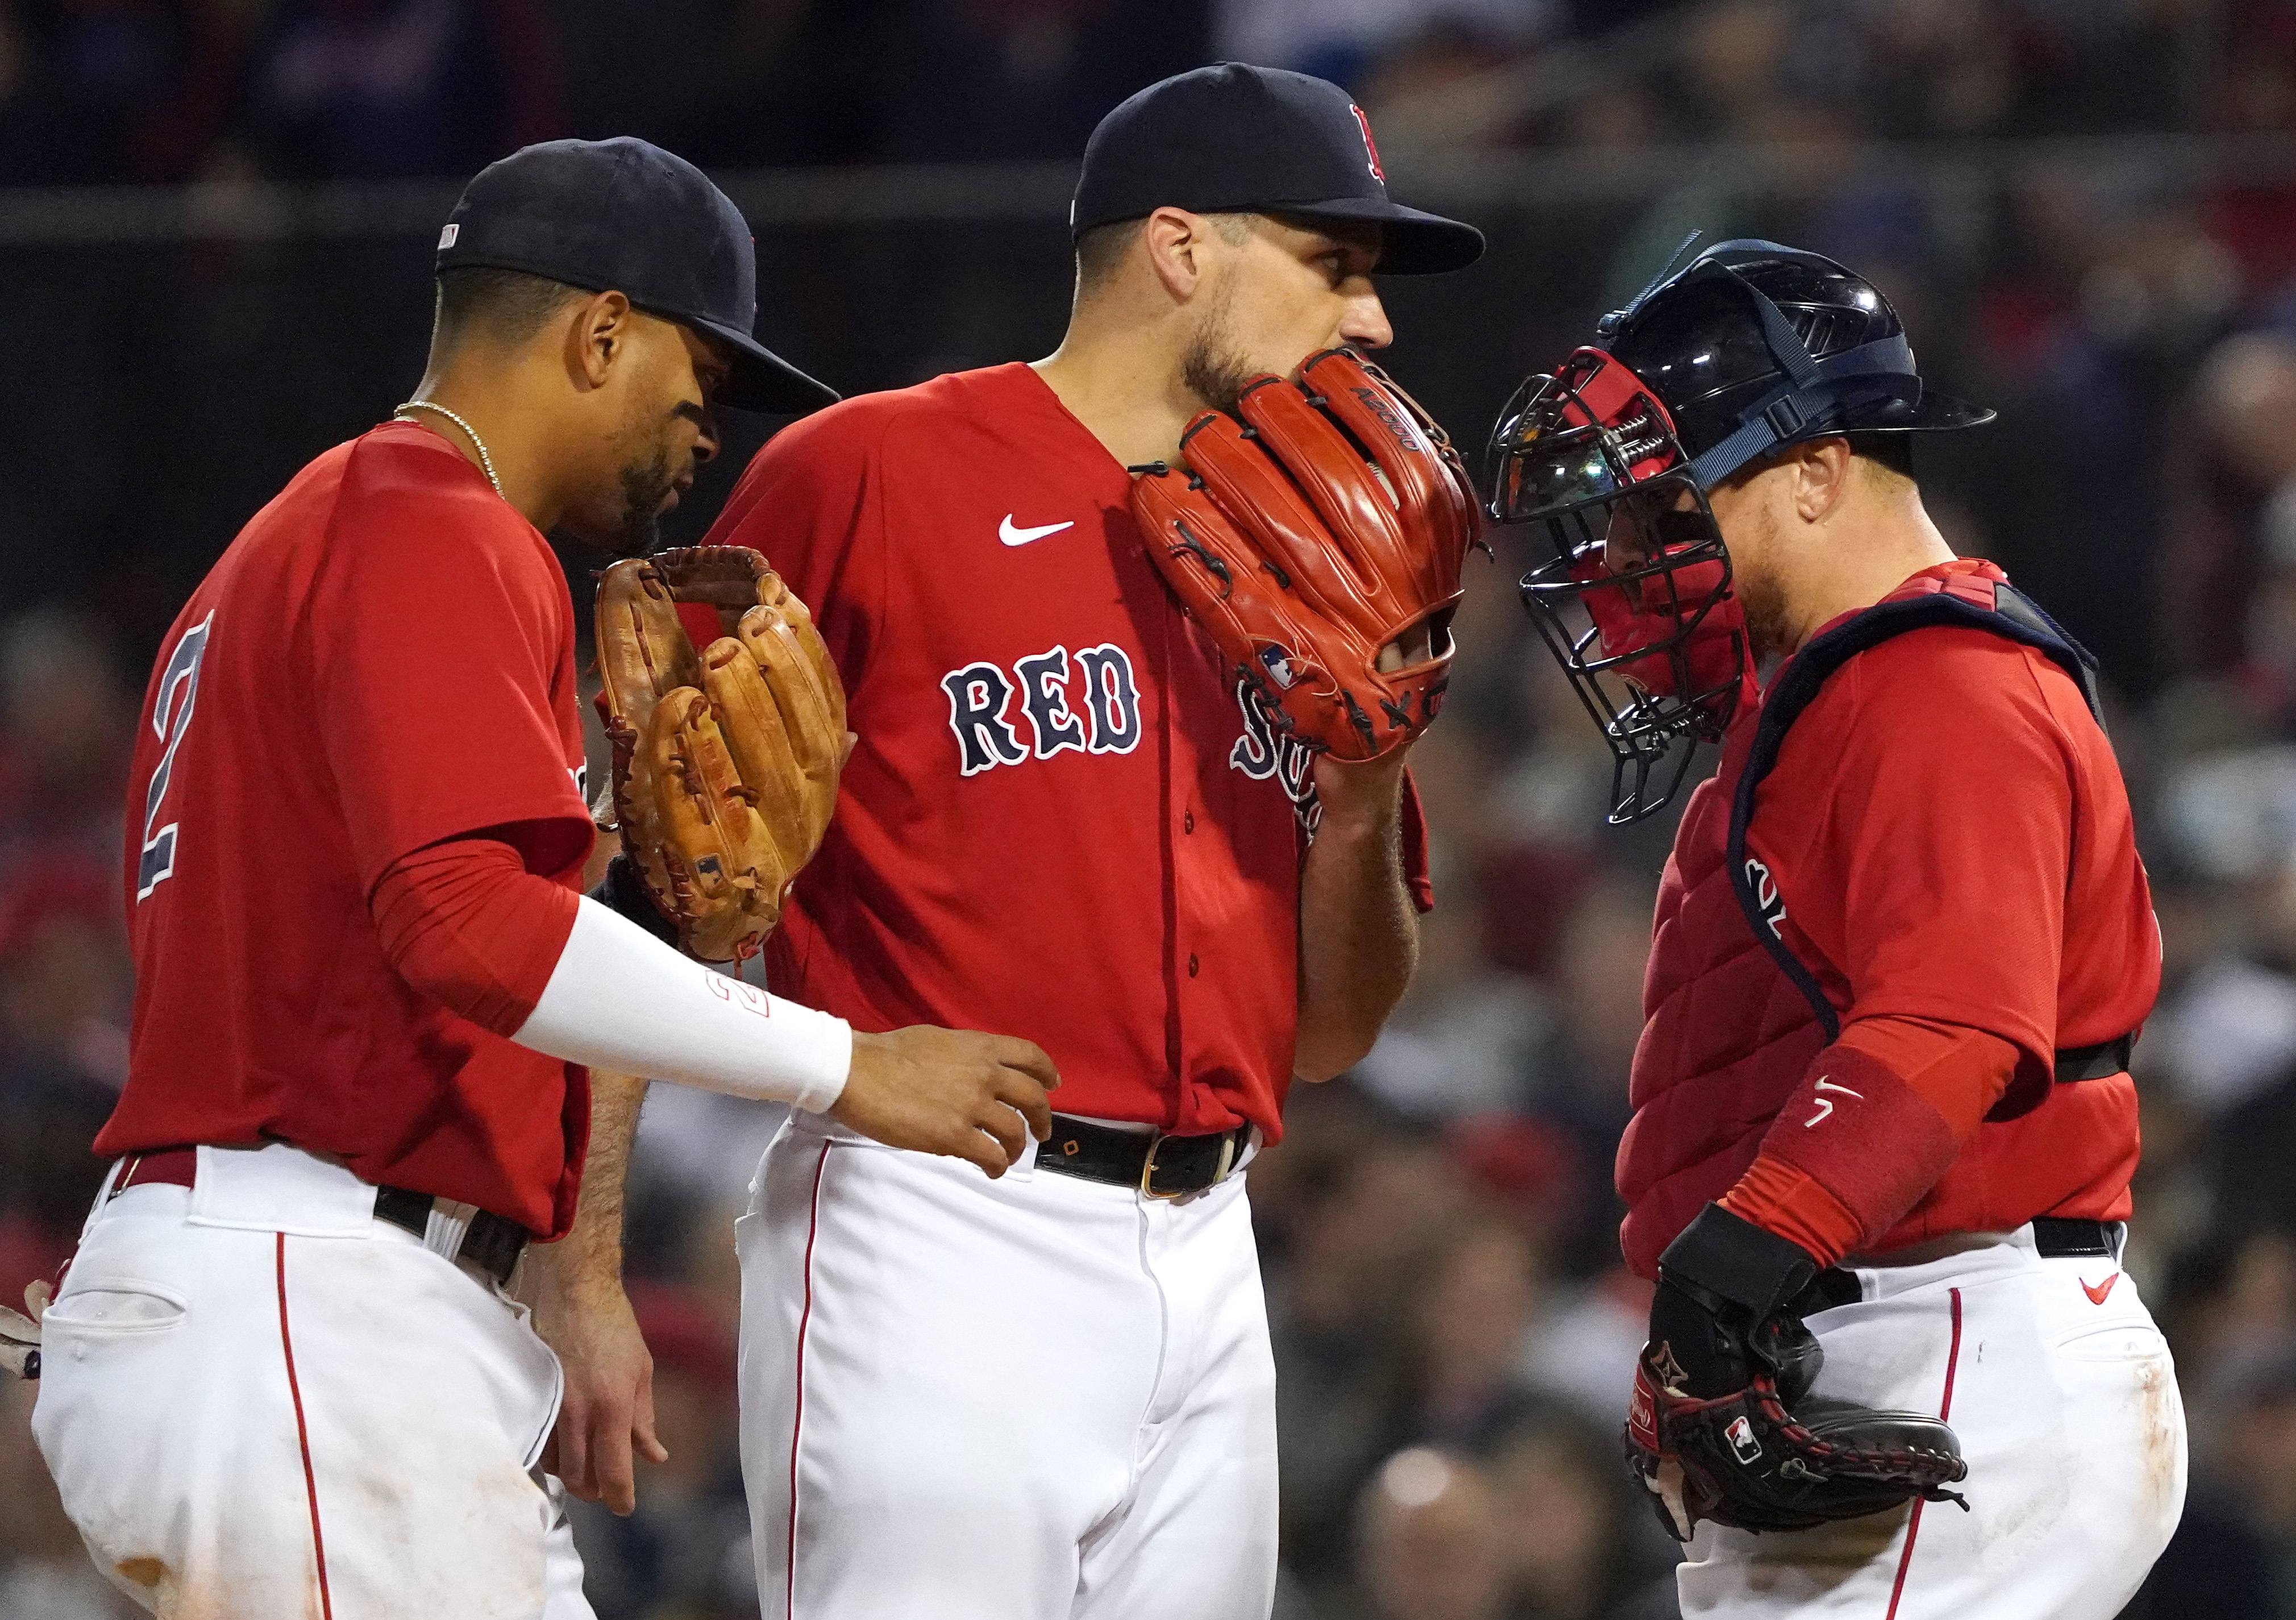 Red Sox Notebook: Nathan Eovaldi continues strong start to 2021